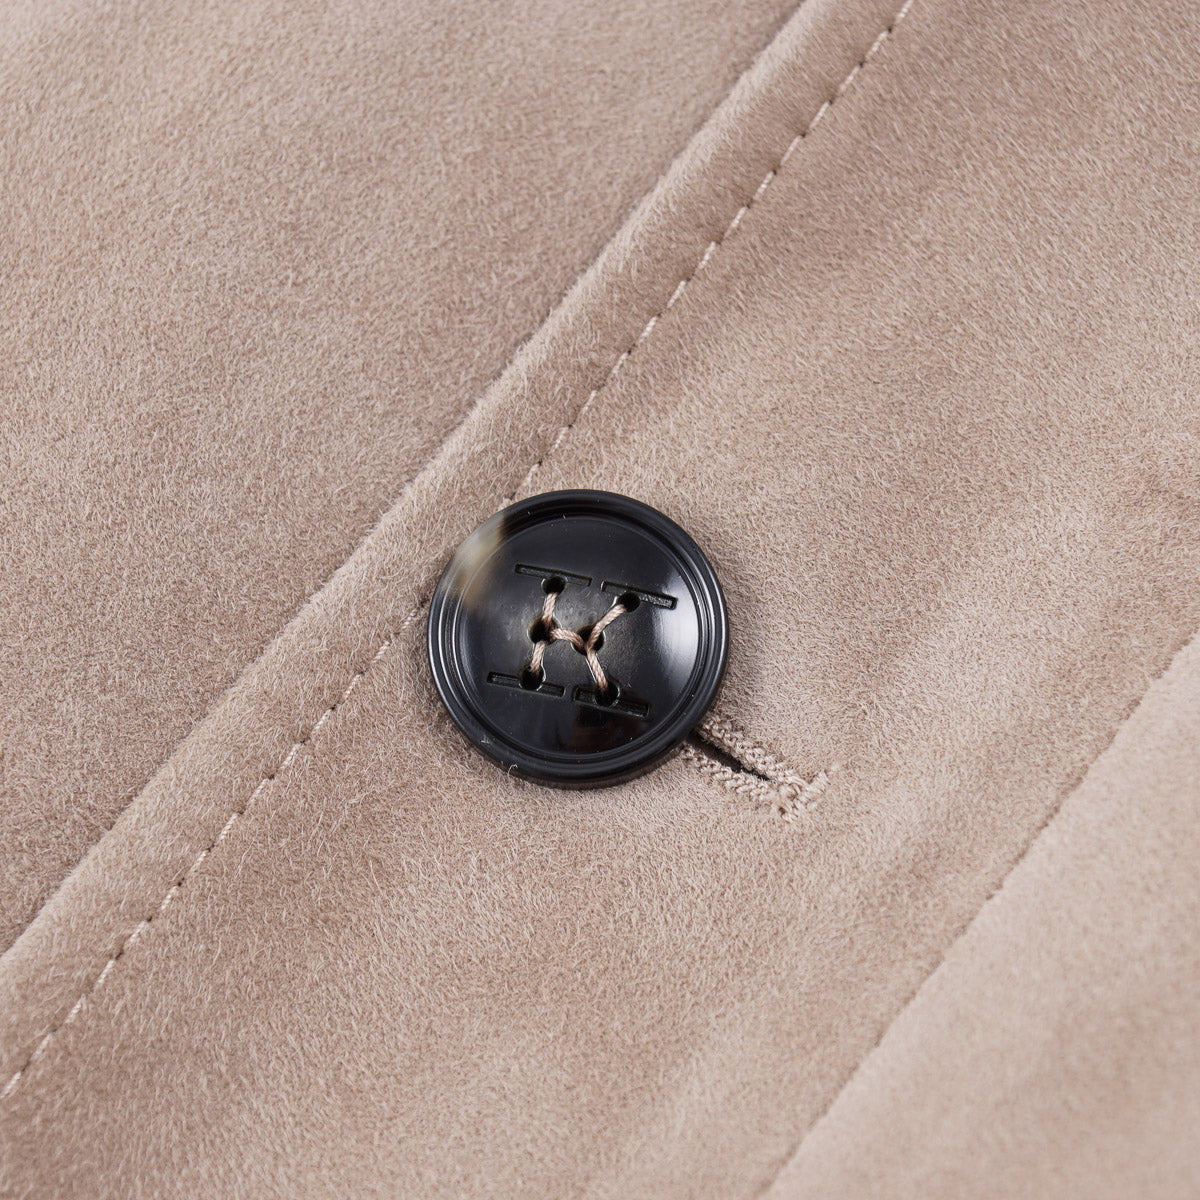 Kiton Reindeer Suede Jacket with Quilted Lining - Top Shelf Apparel